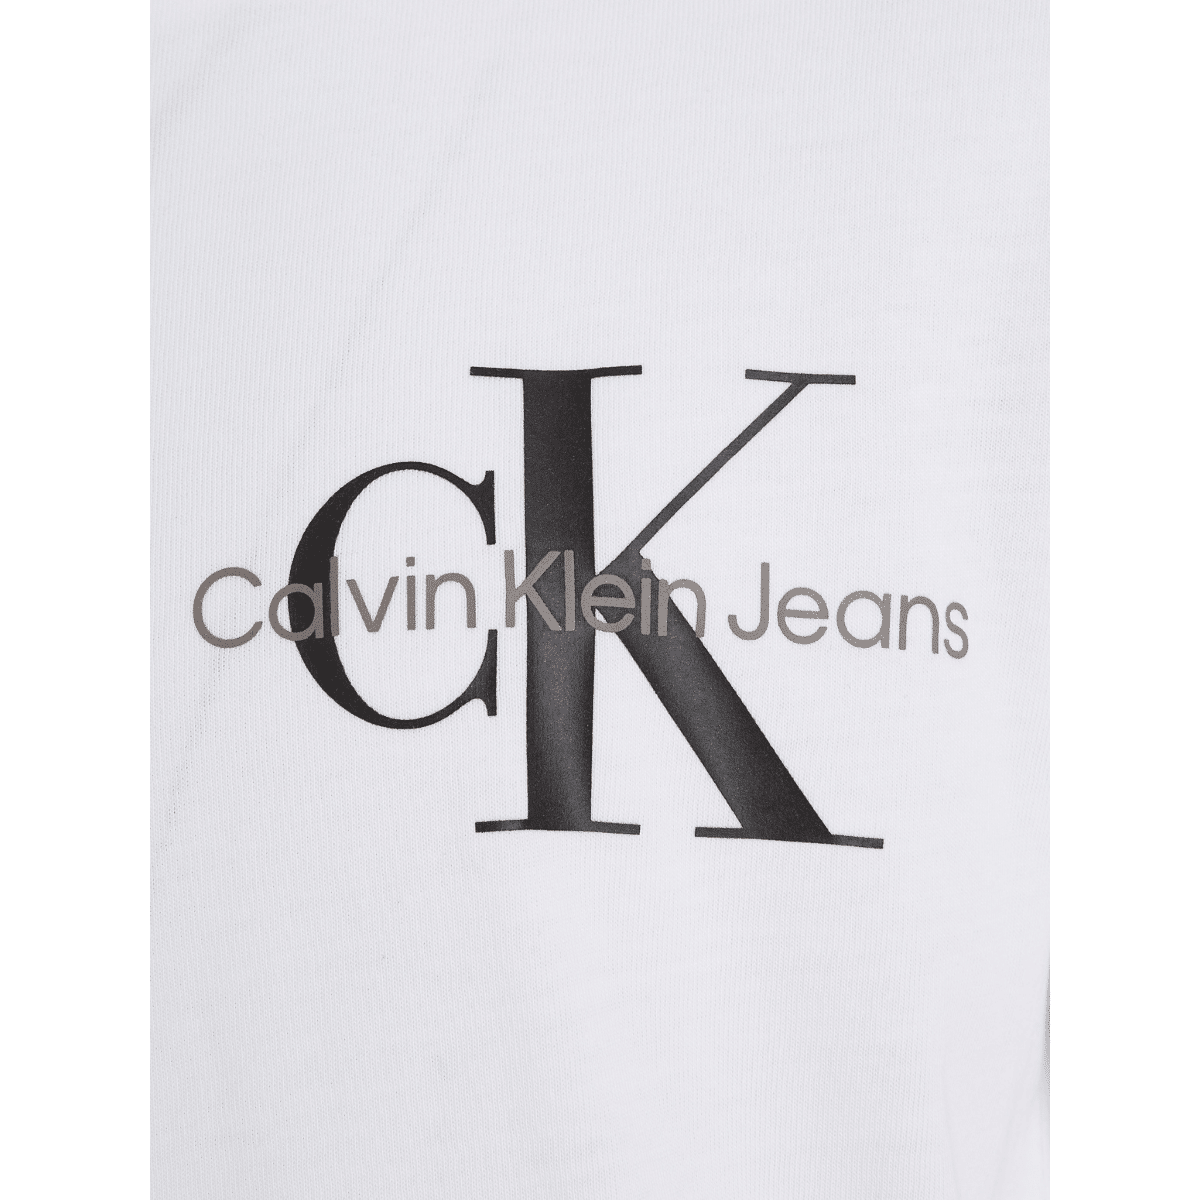 calvin klein childrens white long sleeved top with black logo close up of logo